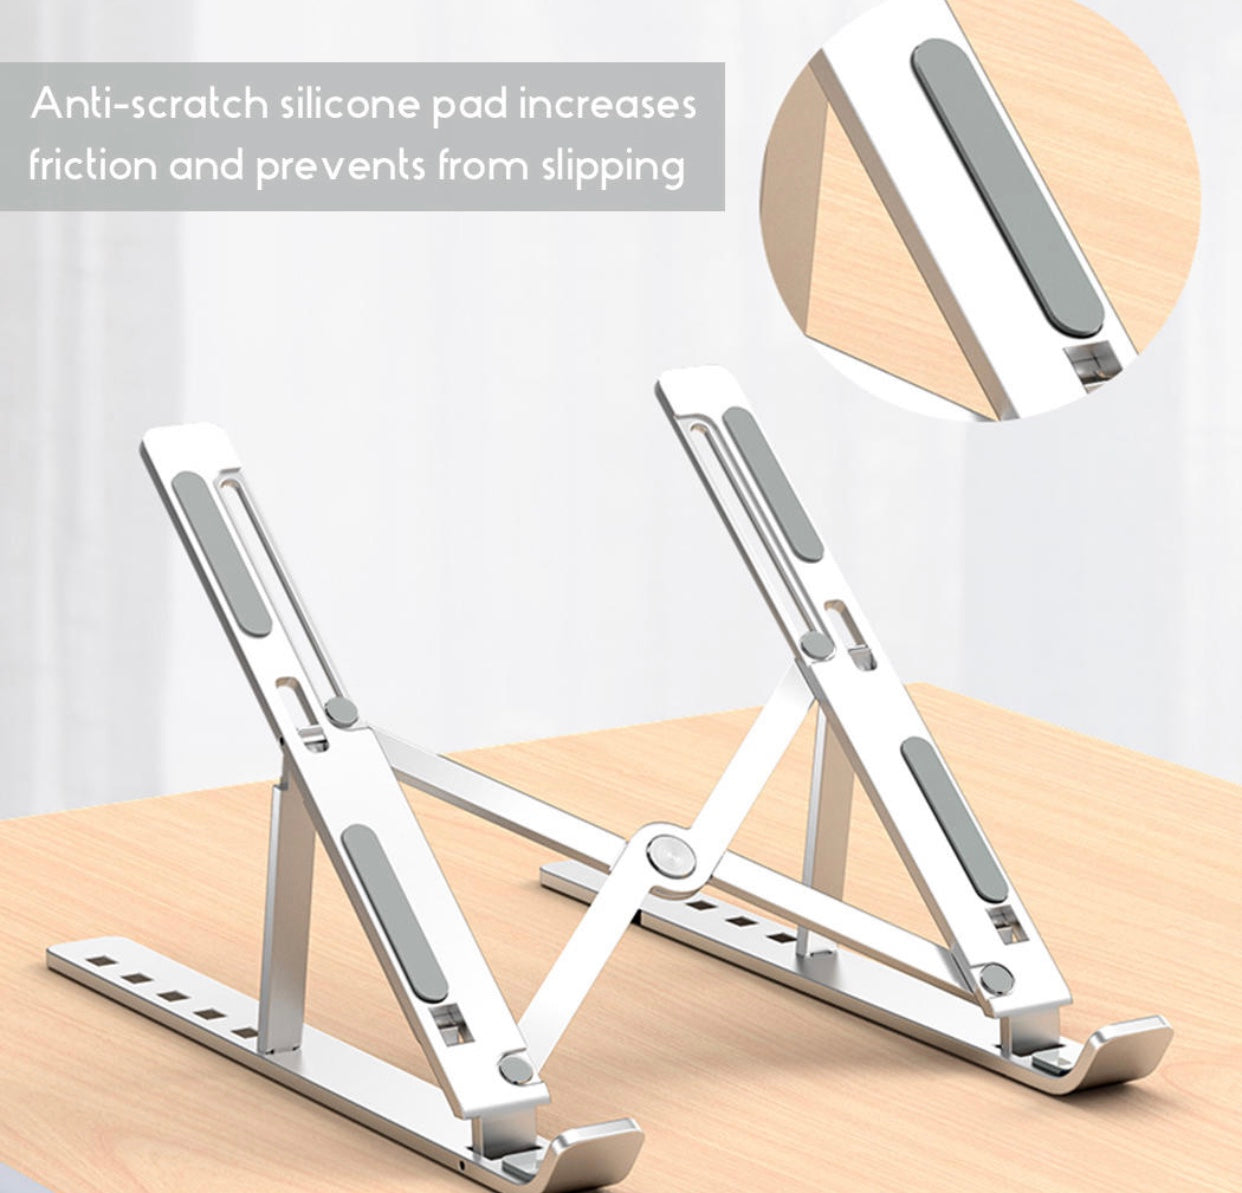 Aluminum Laptop Stand, Foldable, Ergonomic and Portable - Supports Up to 17 inch Screen, Six Level Adjustment. Anti-skid material.